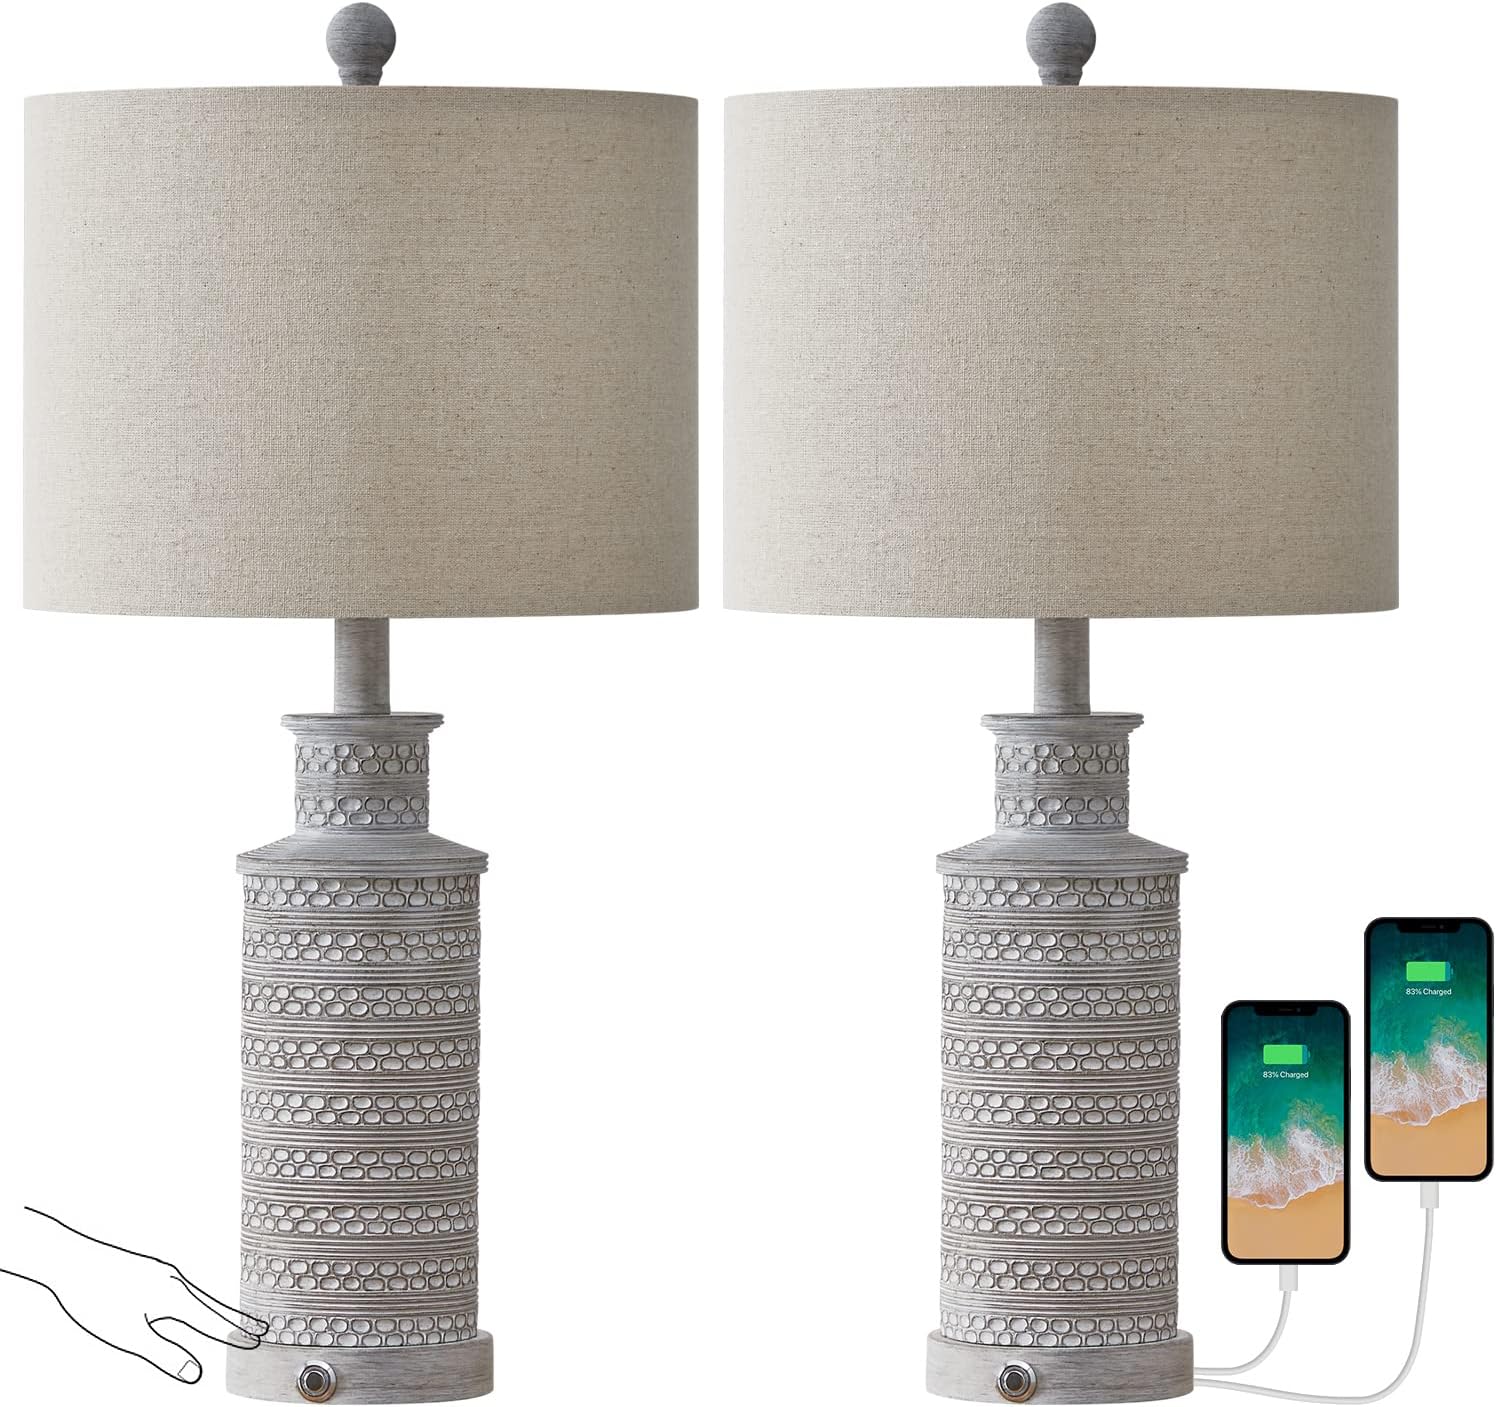 BOBOMOMO 3-Way Dimmable Touch Control Table Lamp Set of 2 with Dual USB Charging Ports for Bedroom Living Room Vintage Rustic Farmhouse